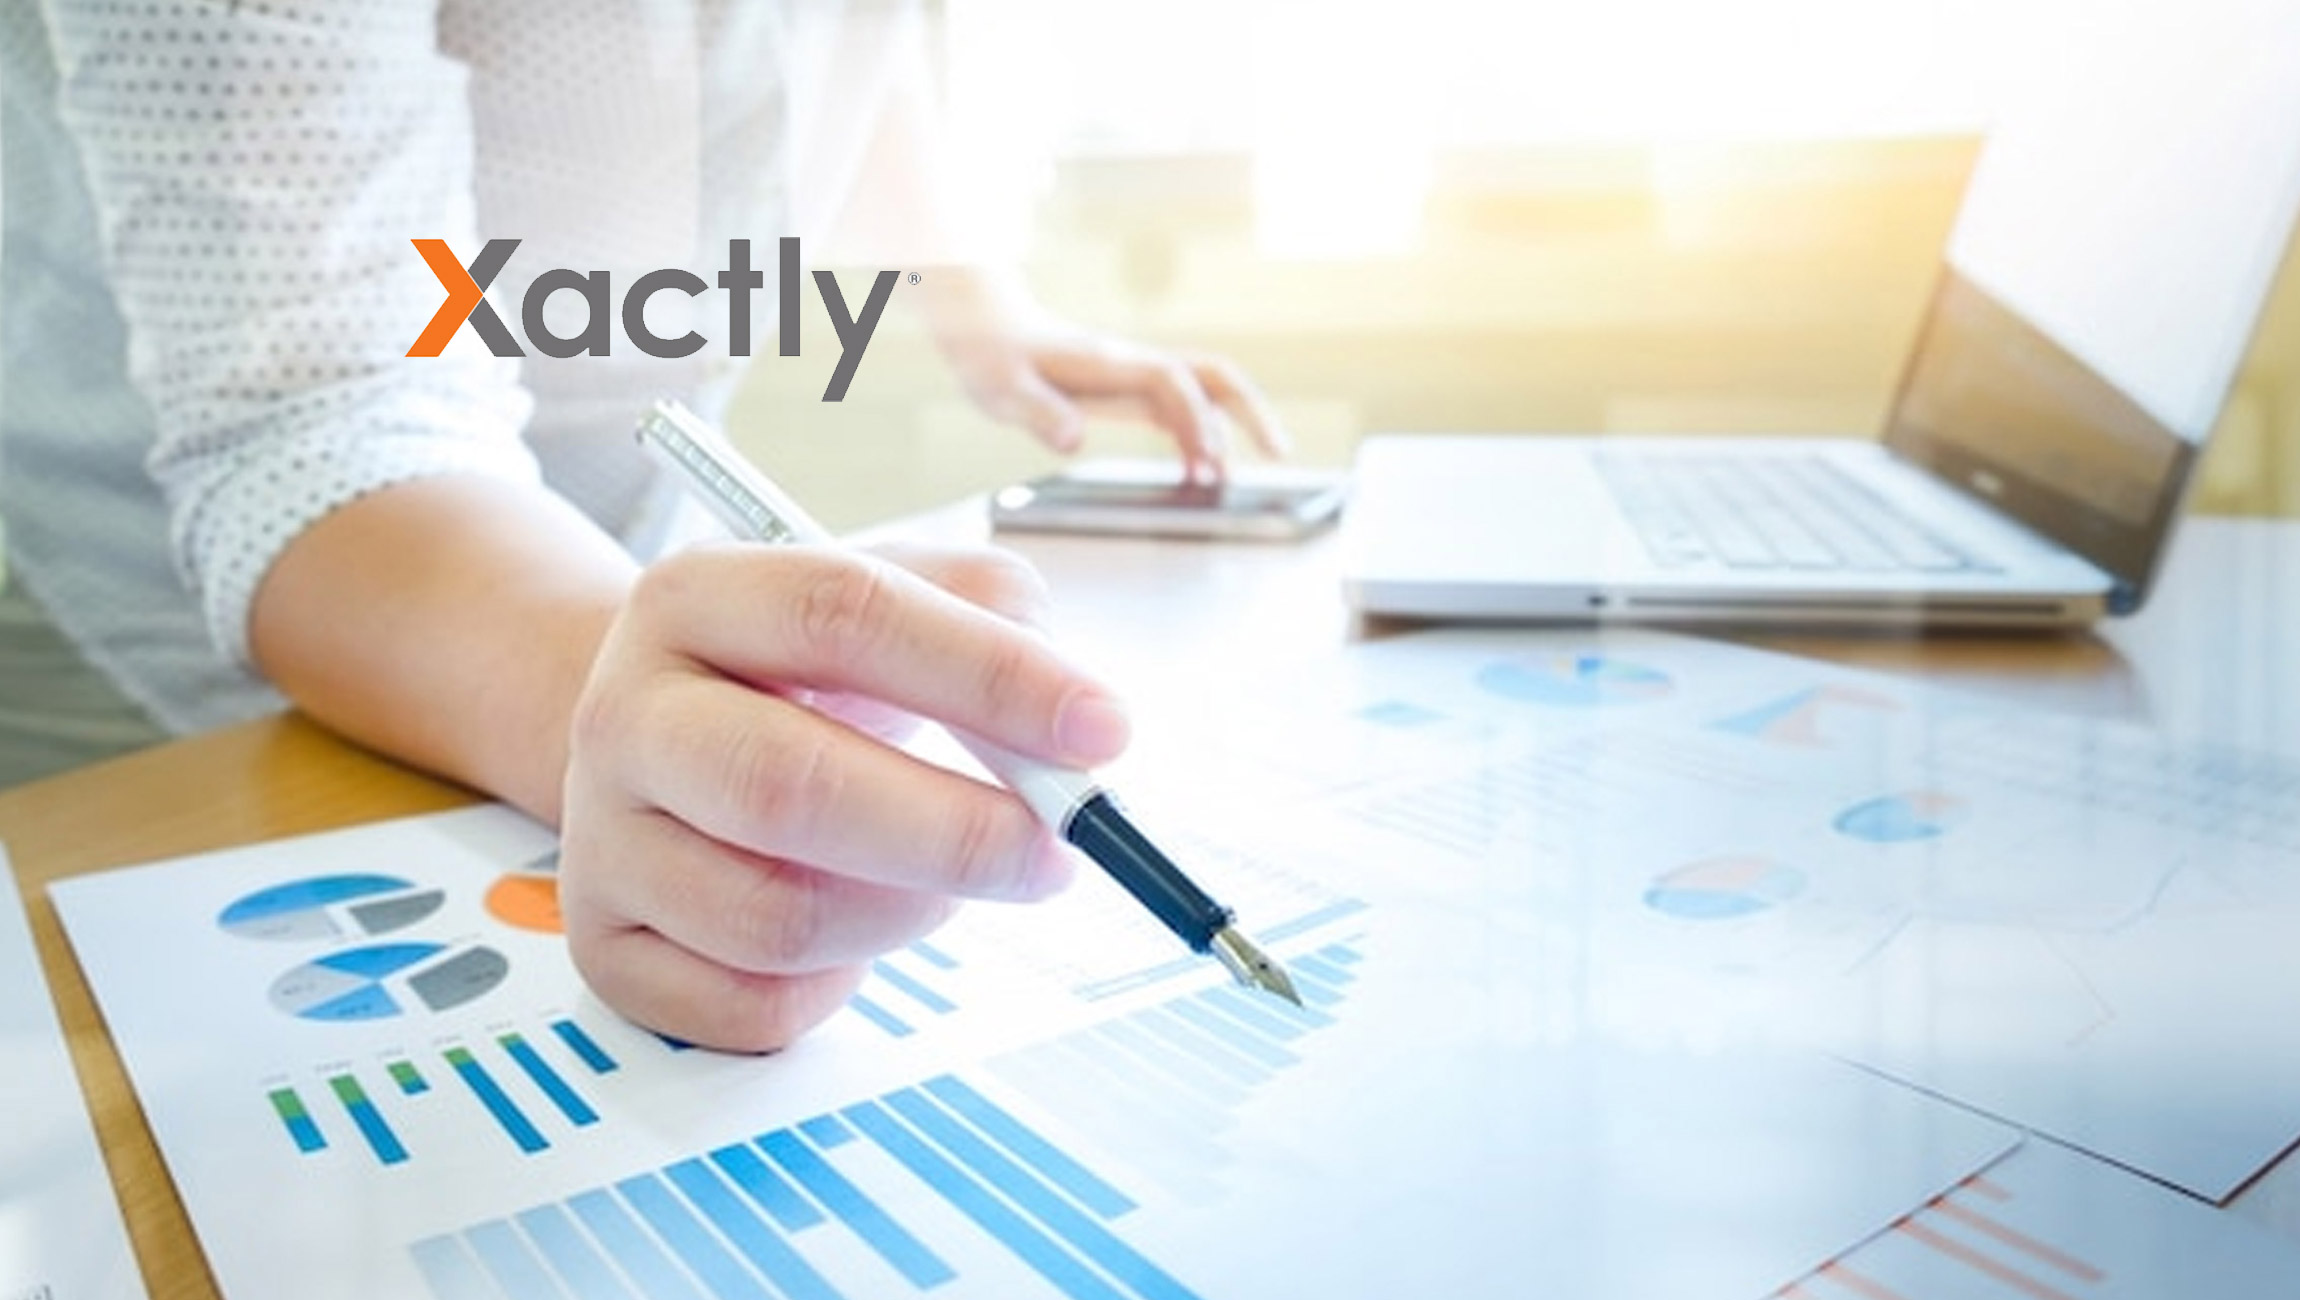 Xactly Revolutionizes Sales Performance Management with New Innovations